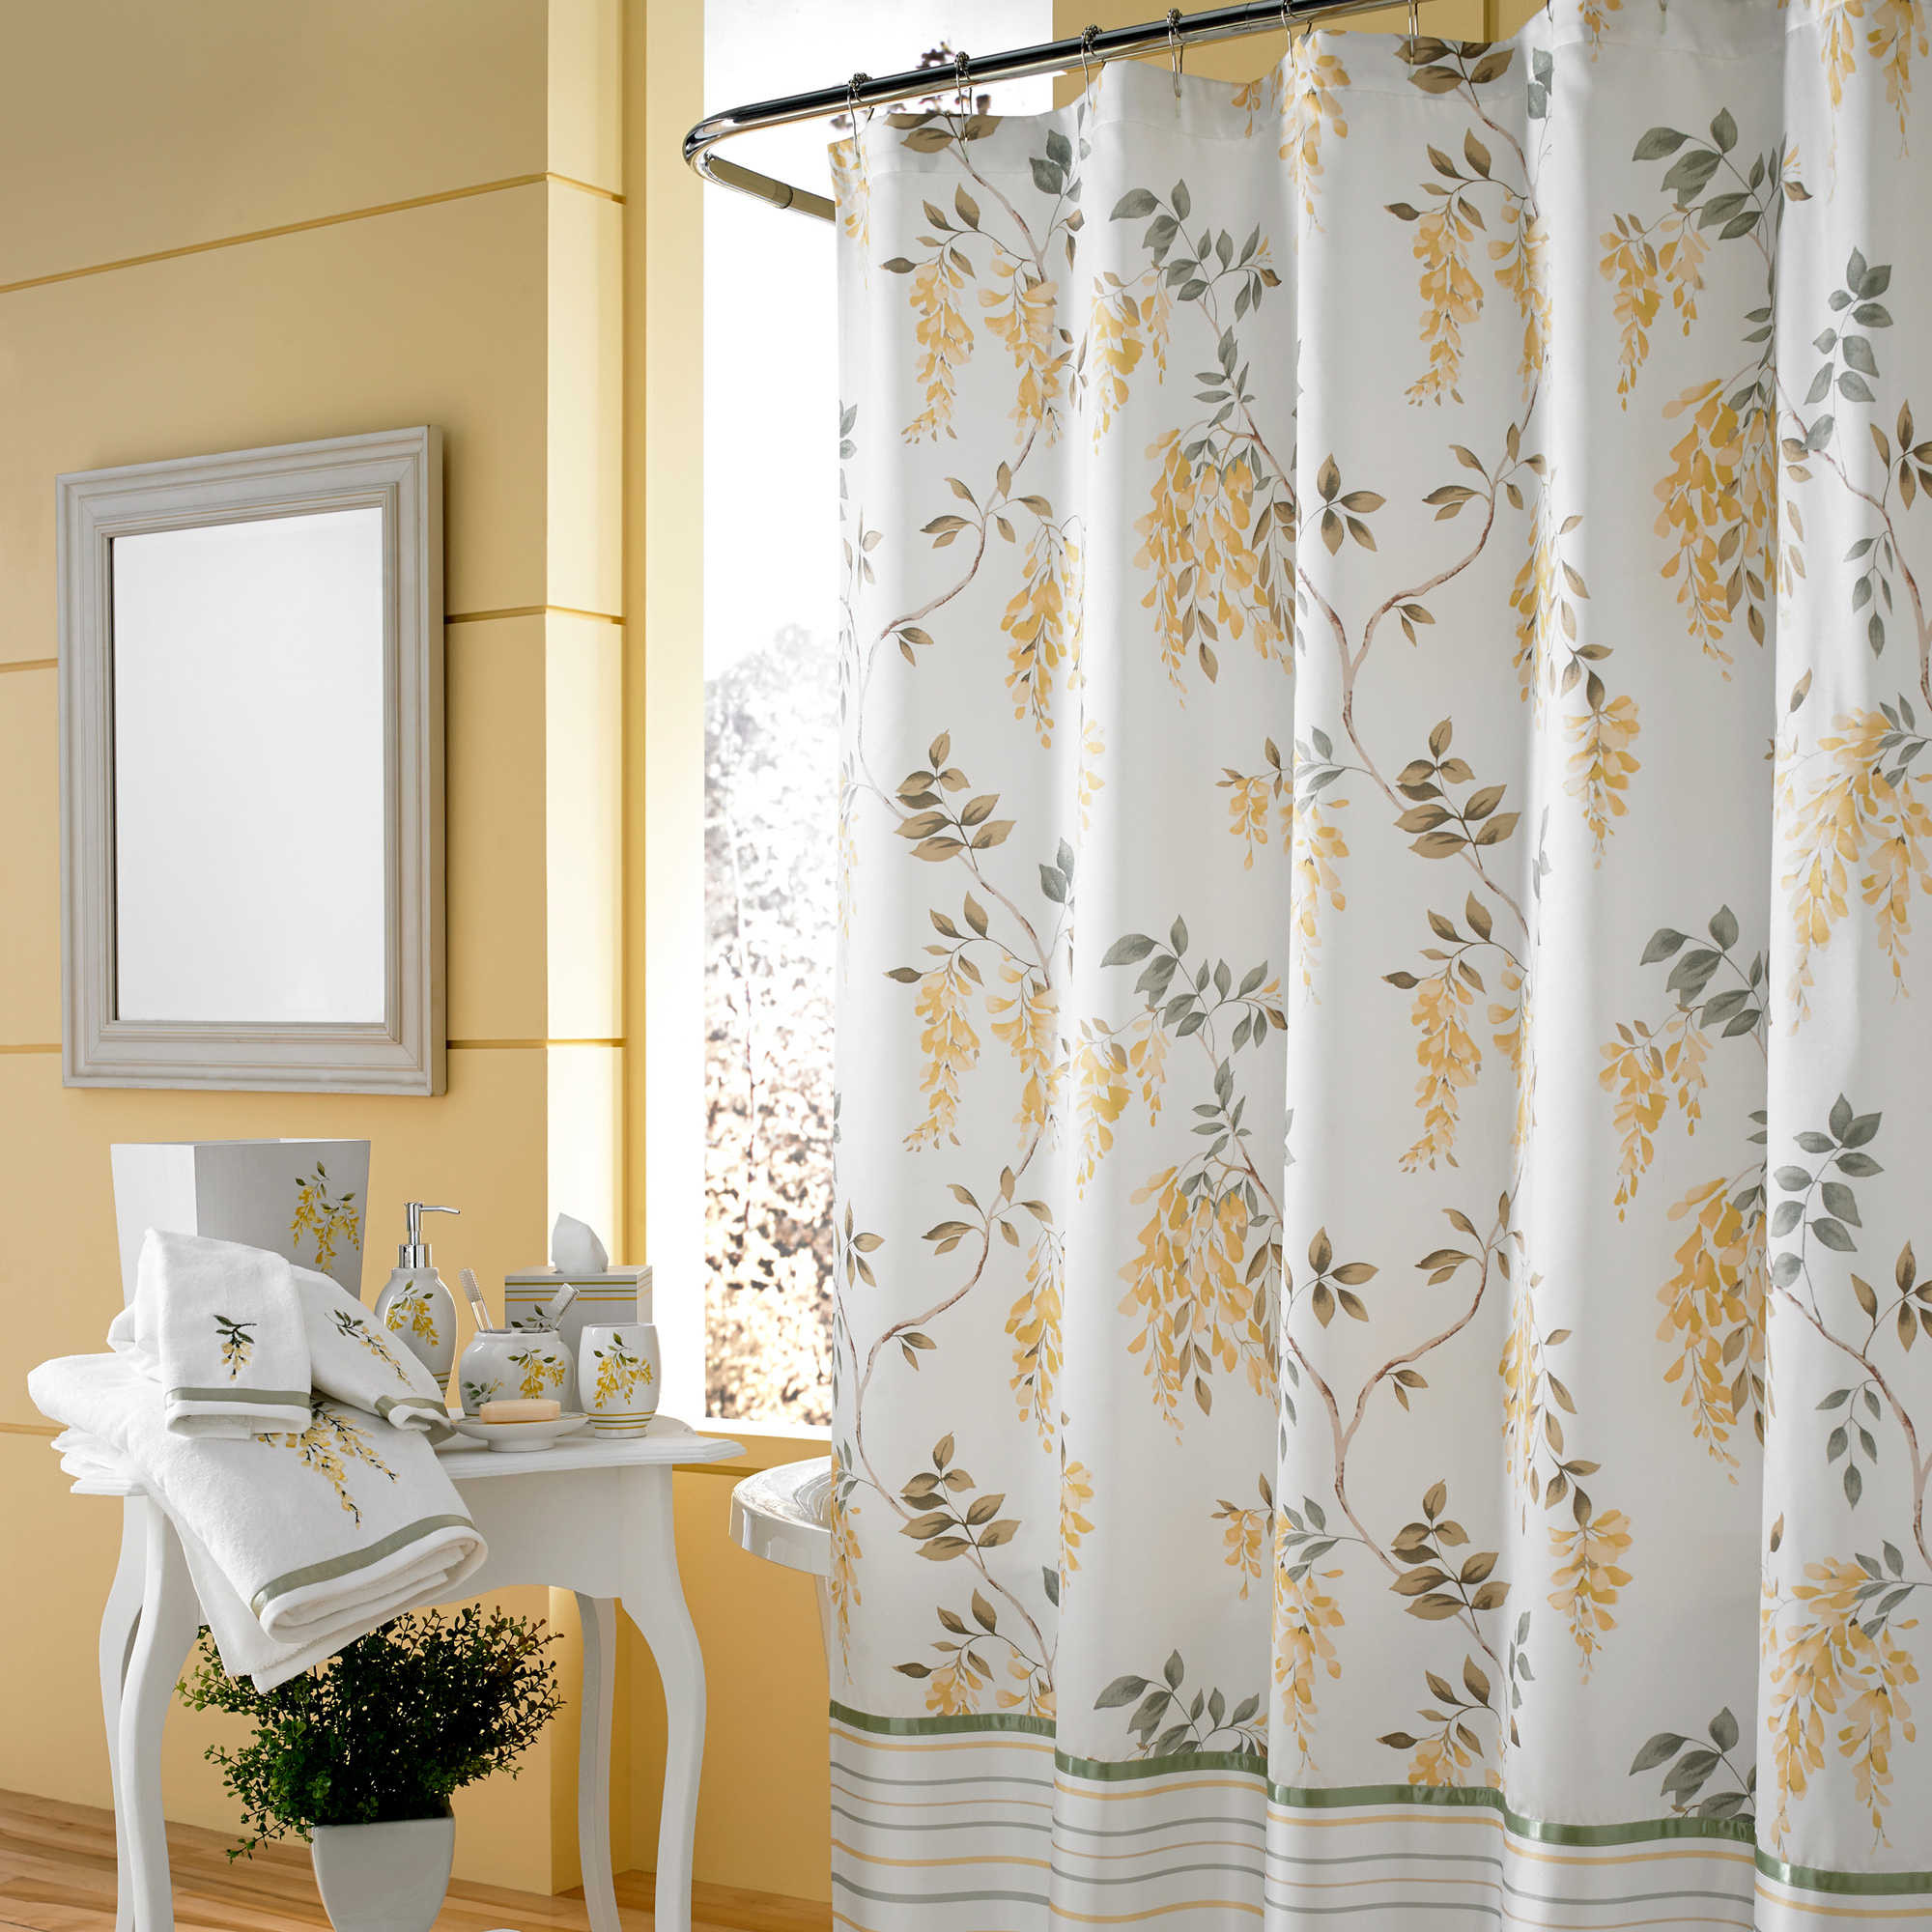 Bathroom Shower Accessories
 Bed Bath and Beyond Shower Curtains fer Great Look and